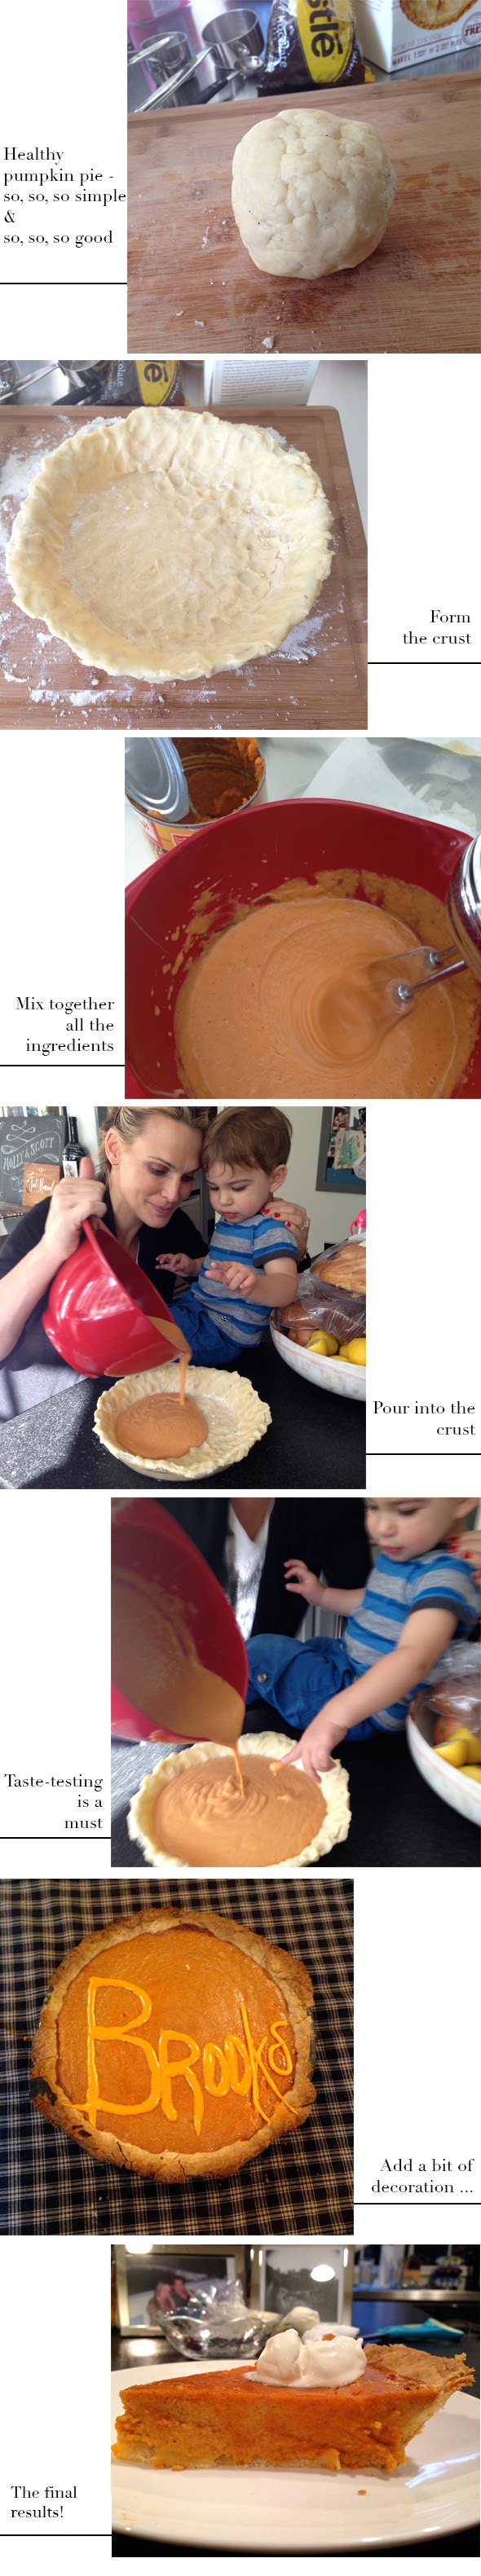 molly sims healthy pumpkin pie how to make